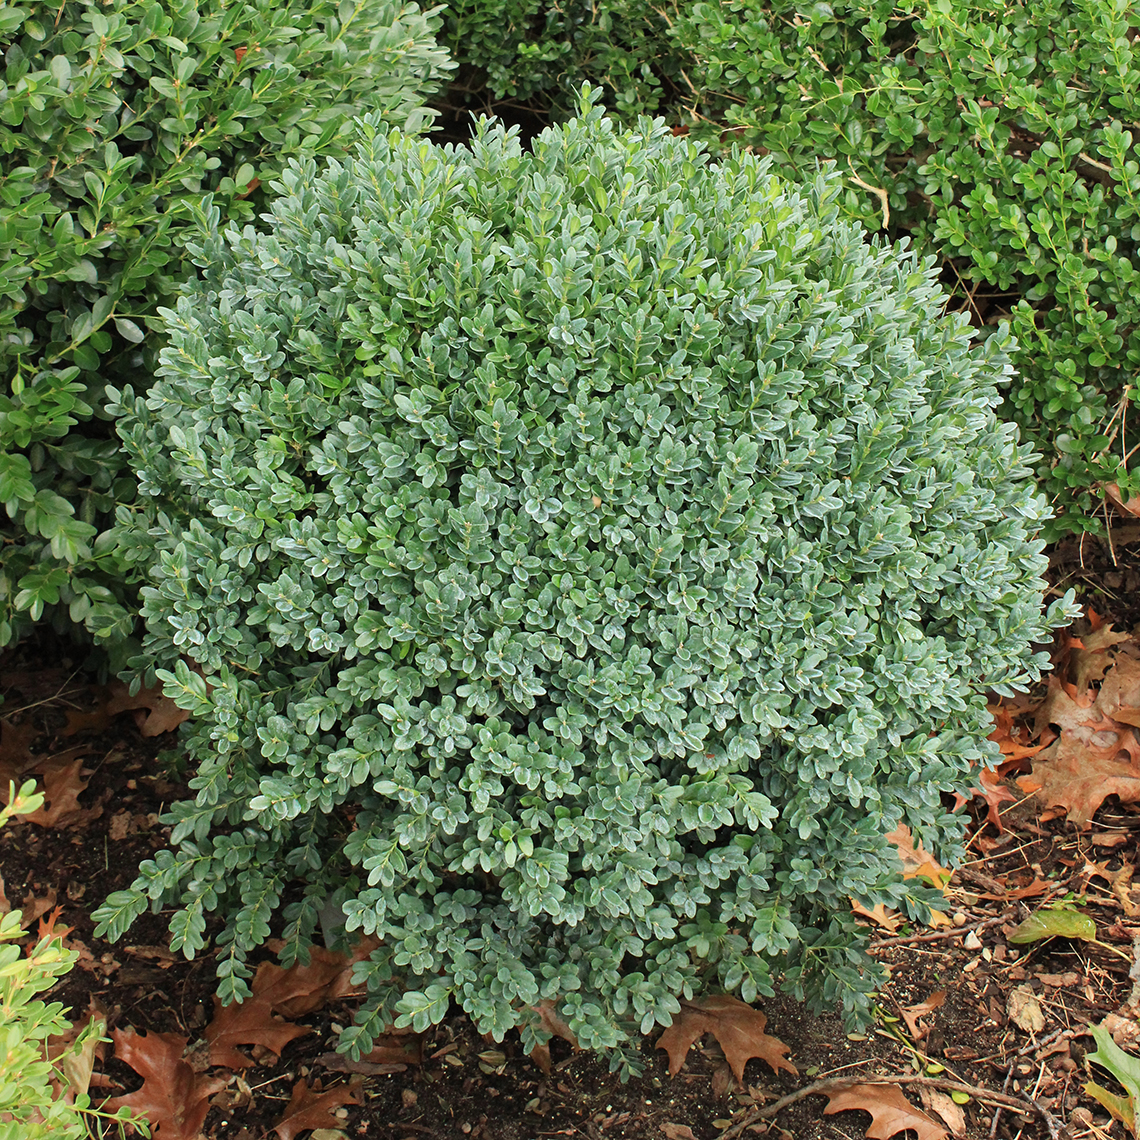 Cool blue green foliage on Green Ice Buxus in landscape